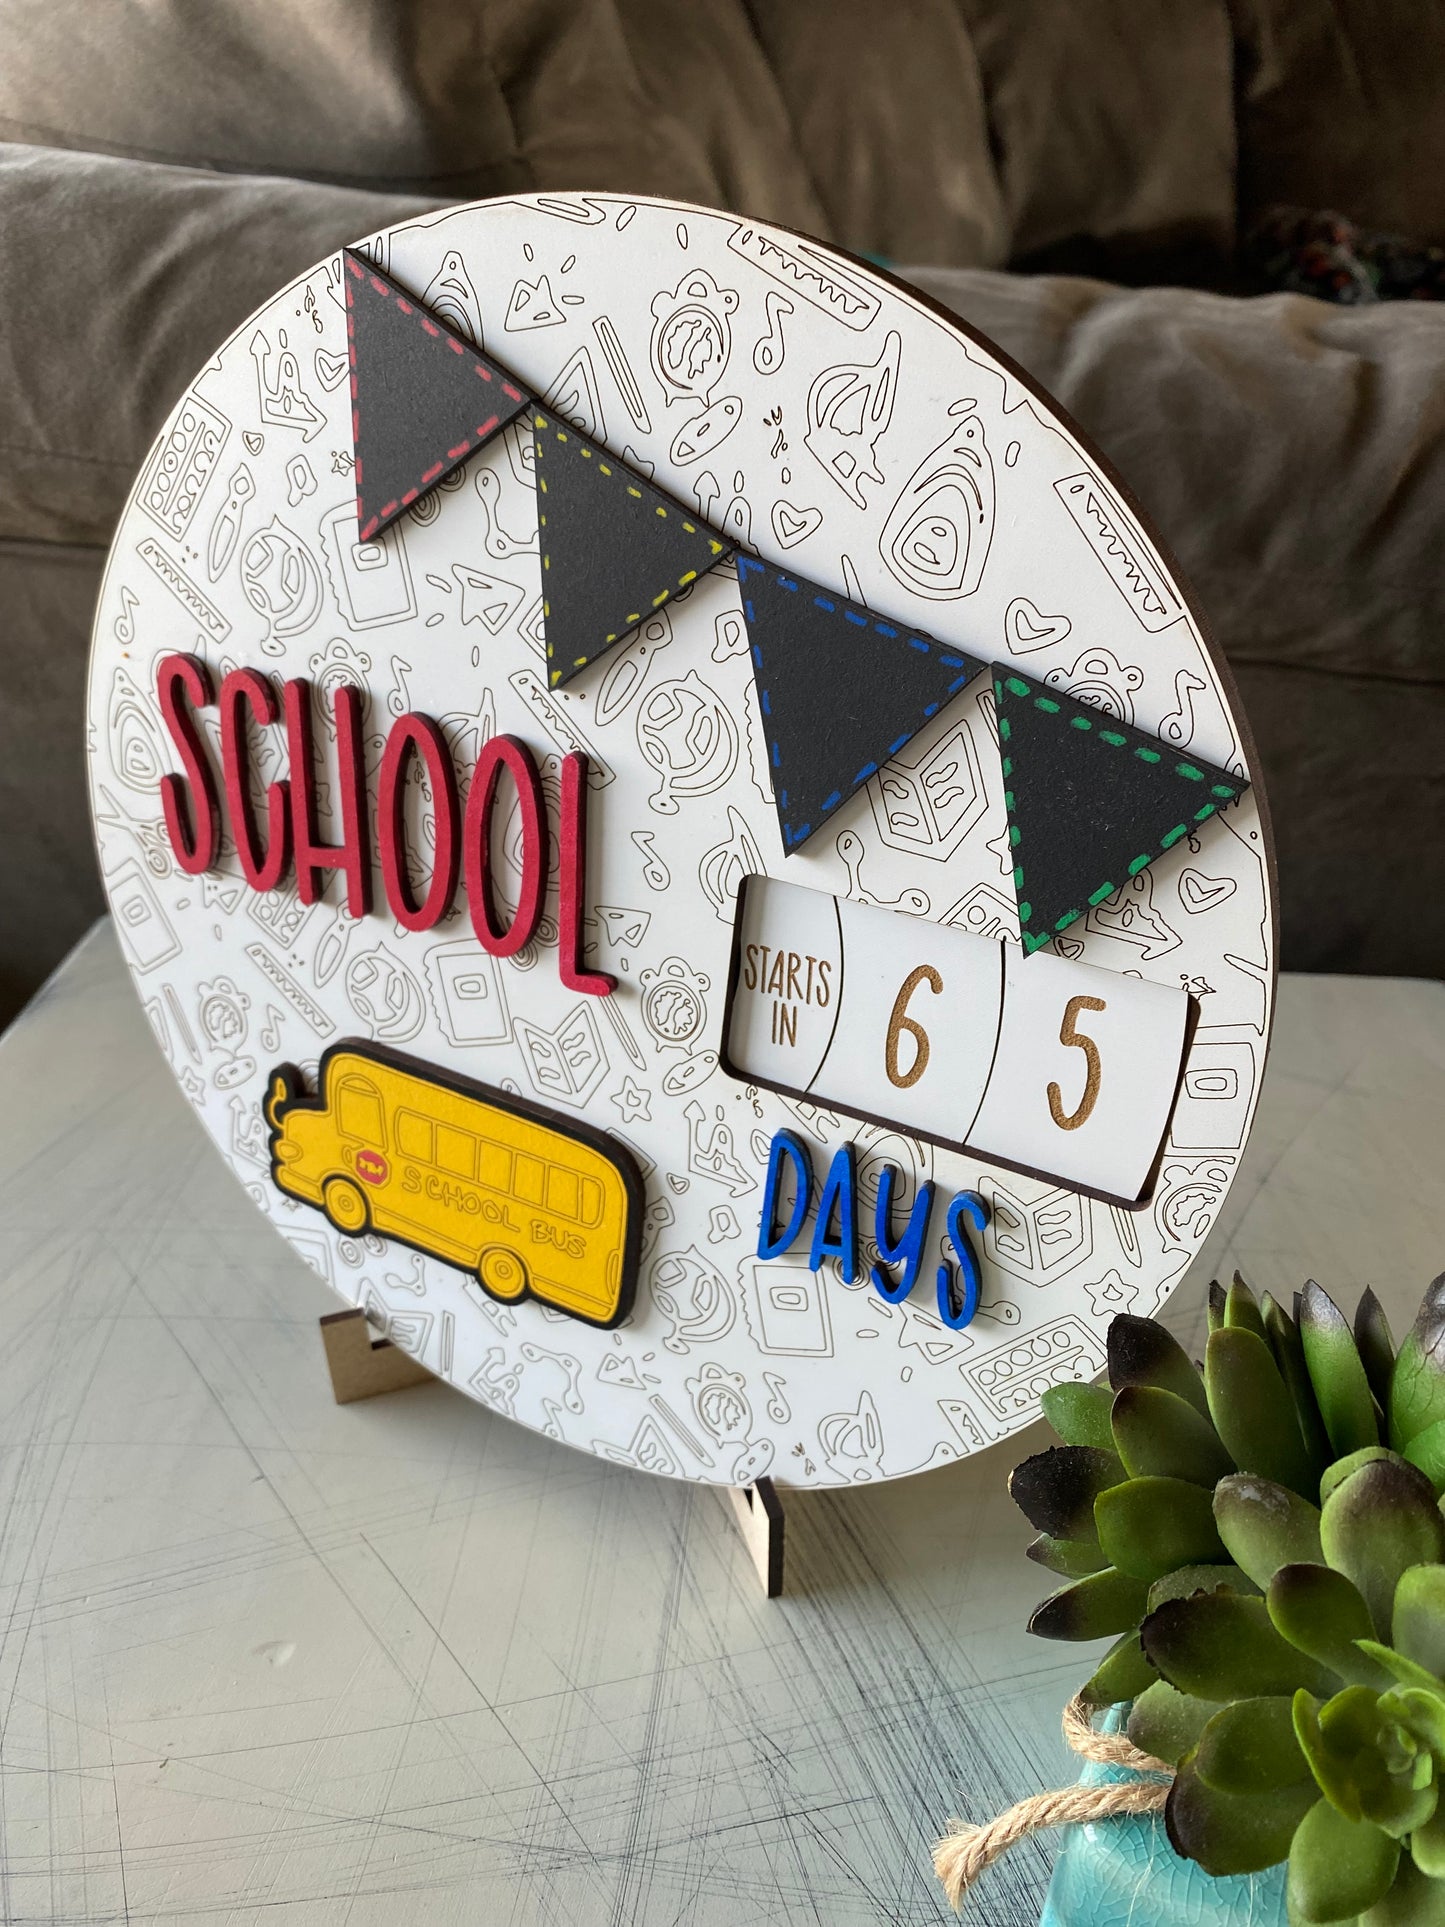 School countdown calendar sign - countdown calendar with self-contained numbers - Novotny Designs